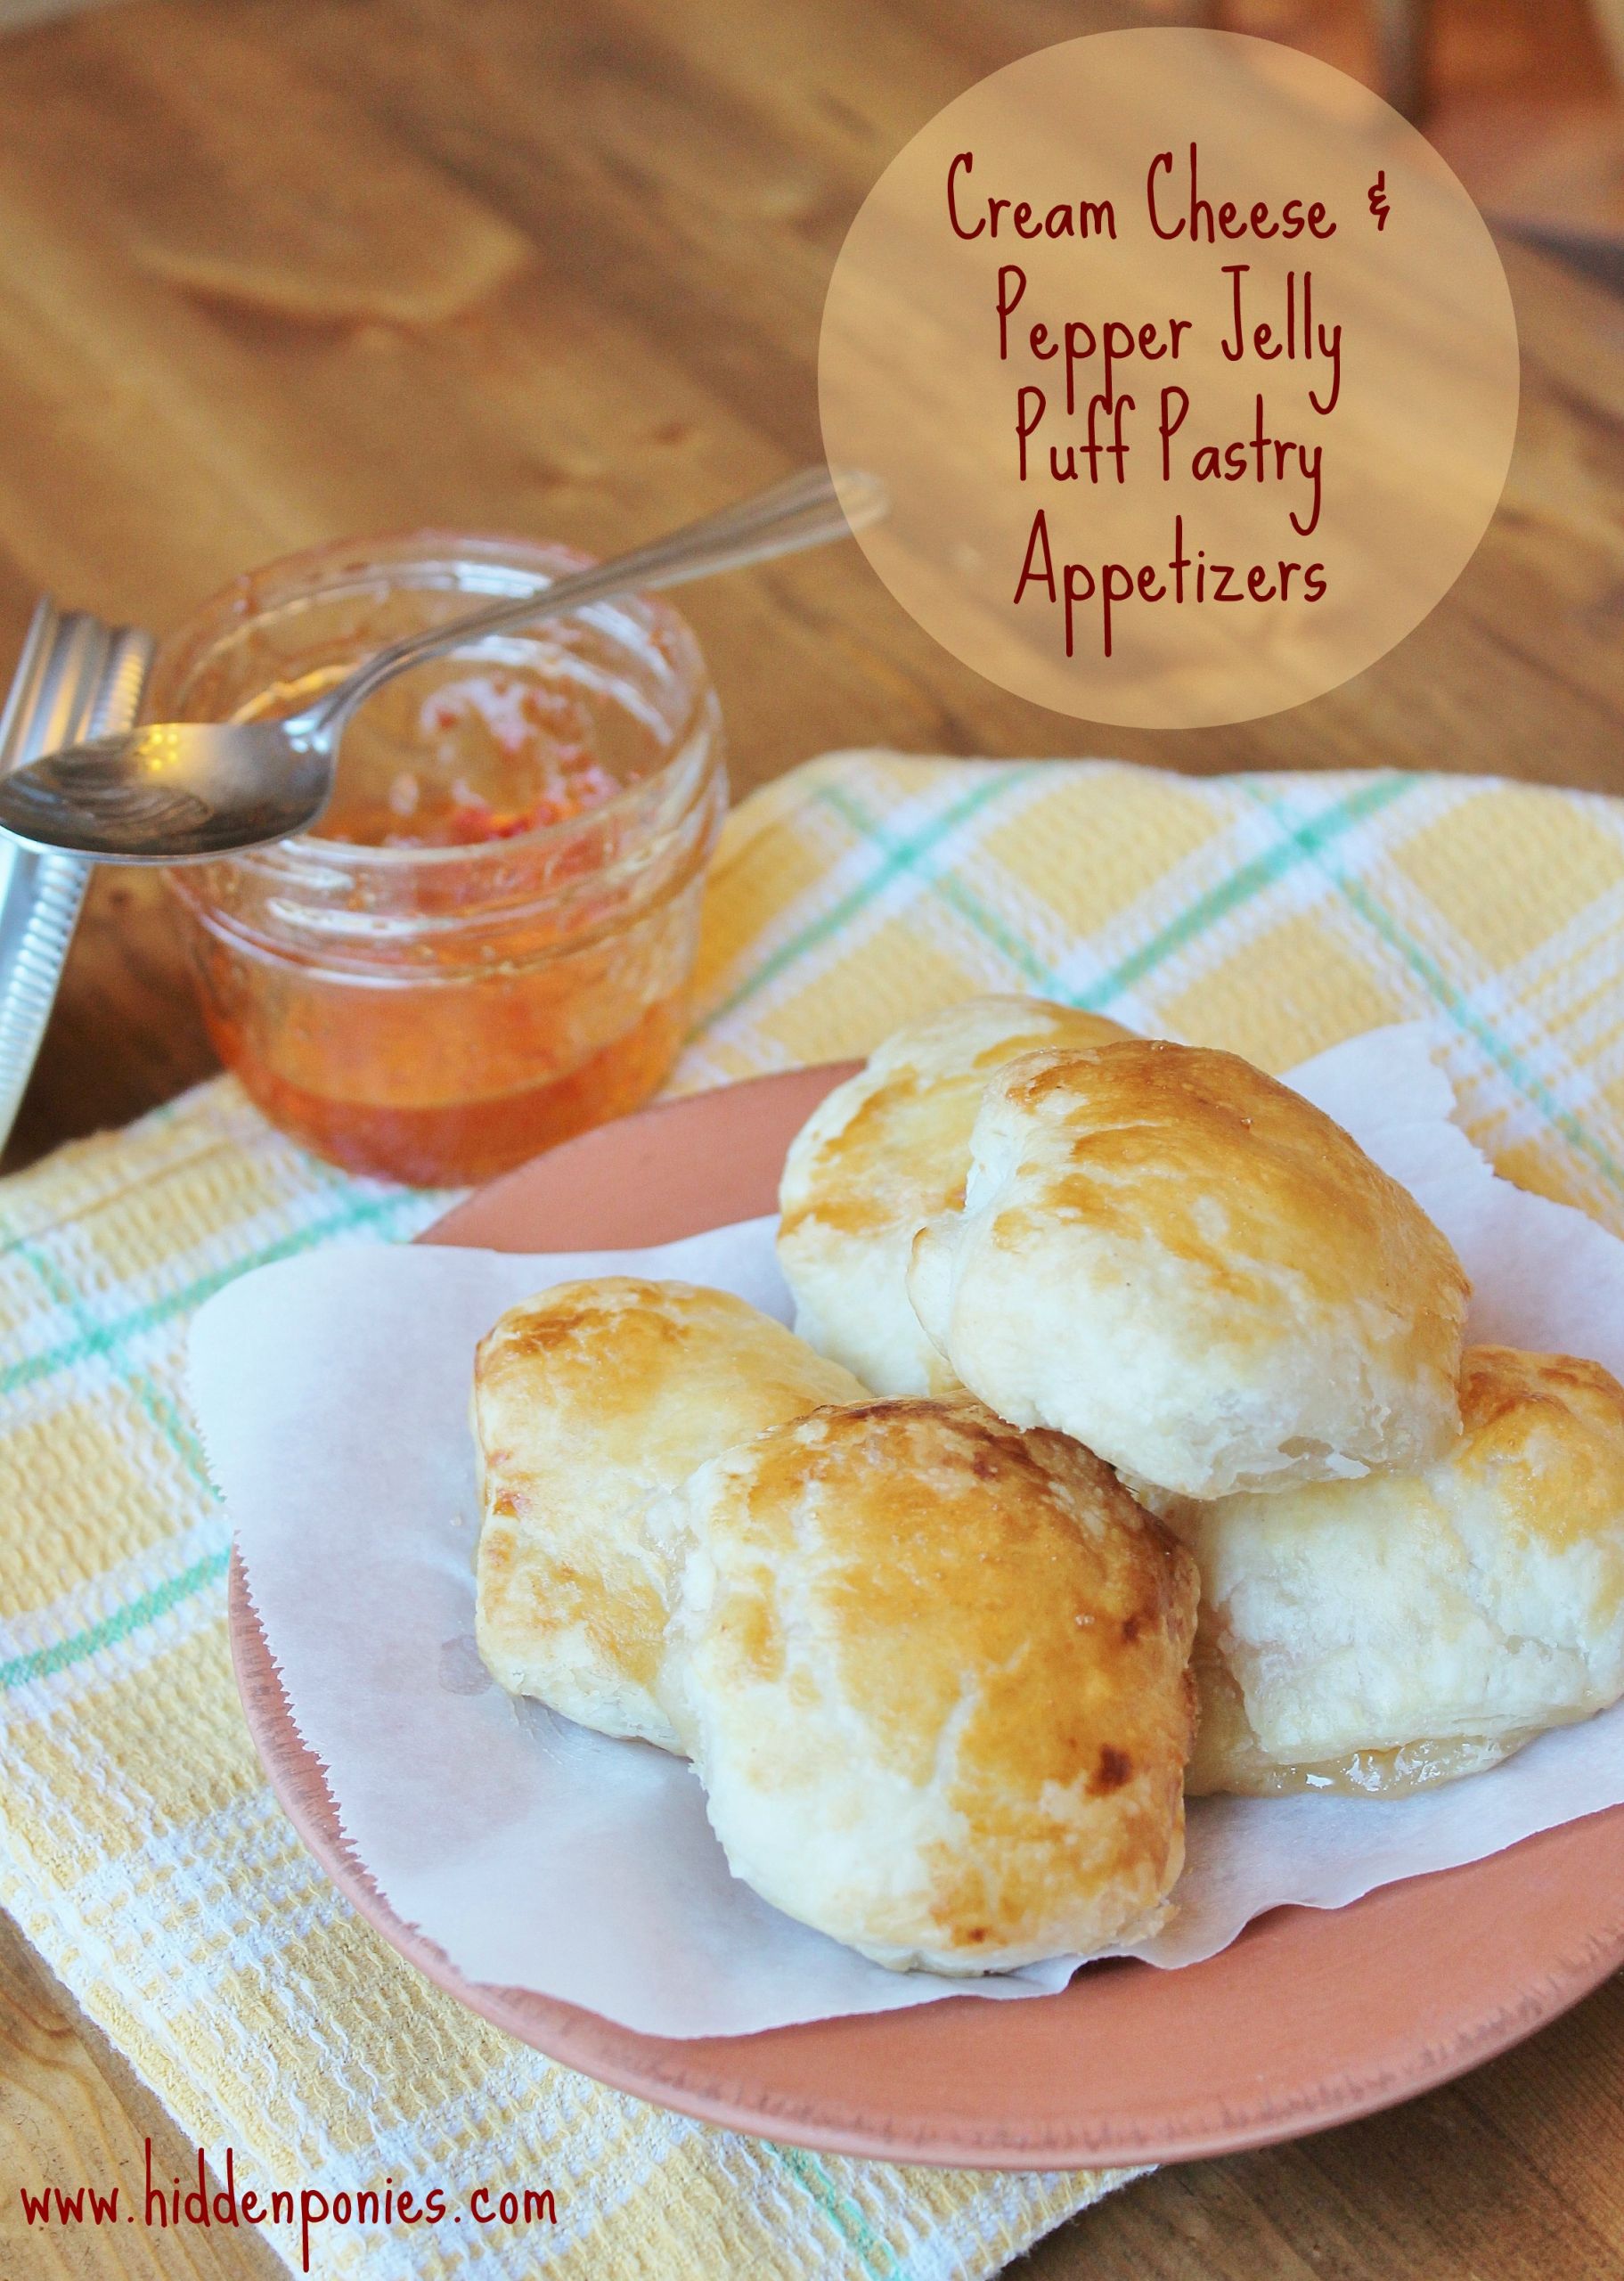 Cream Cheese Appetizers Jelly
 Cream Cheese & Pepper Jelly Puff Pastries